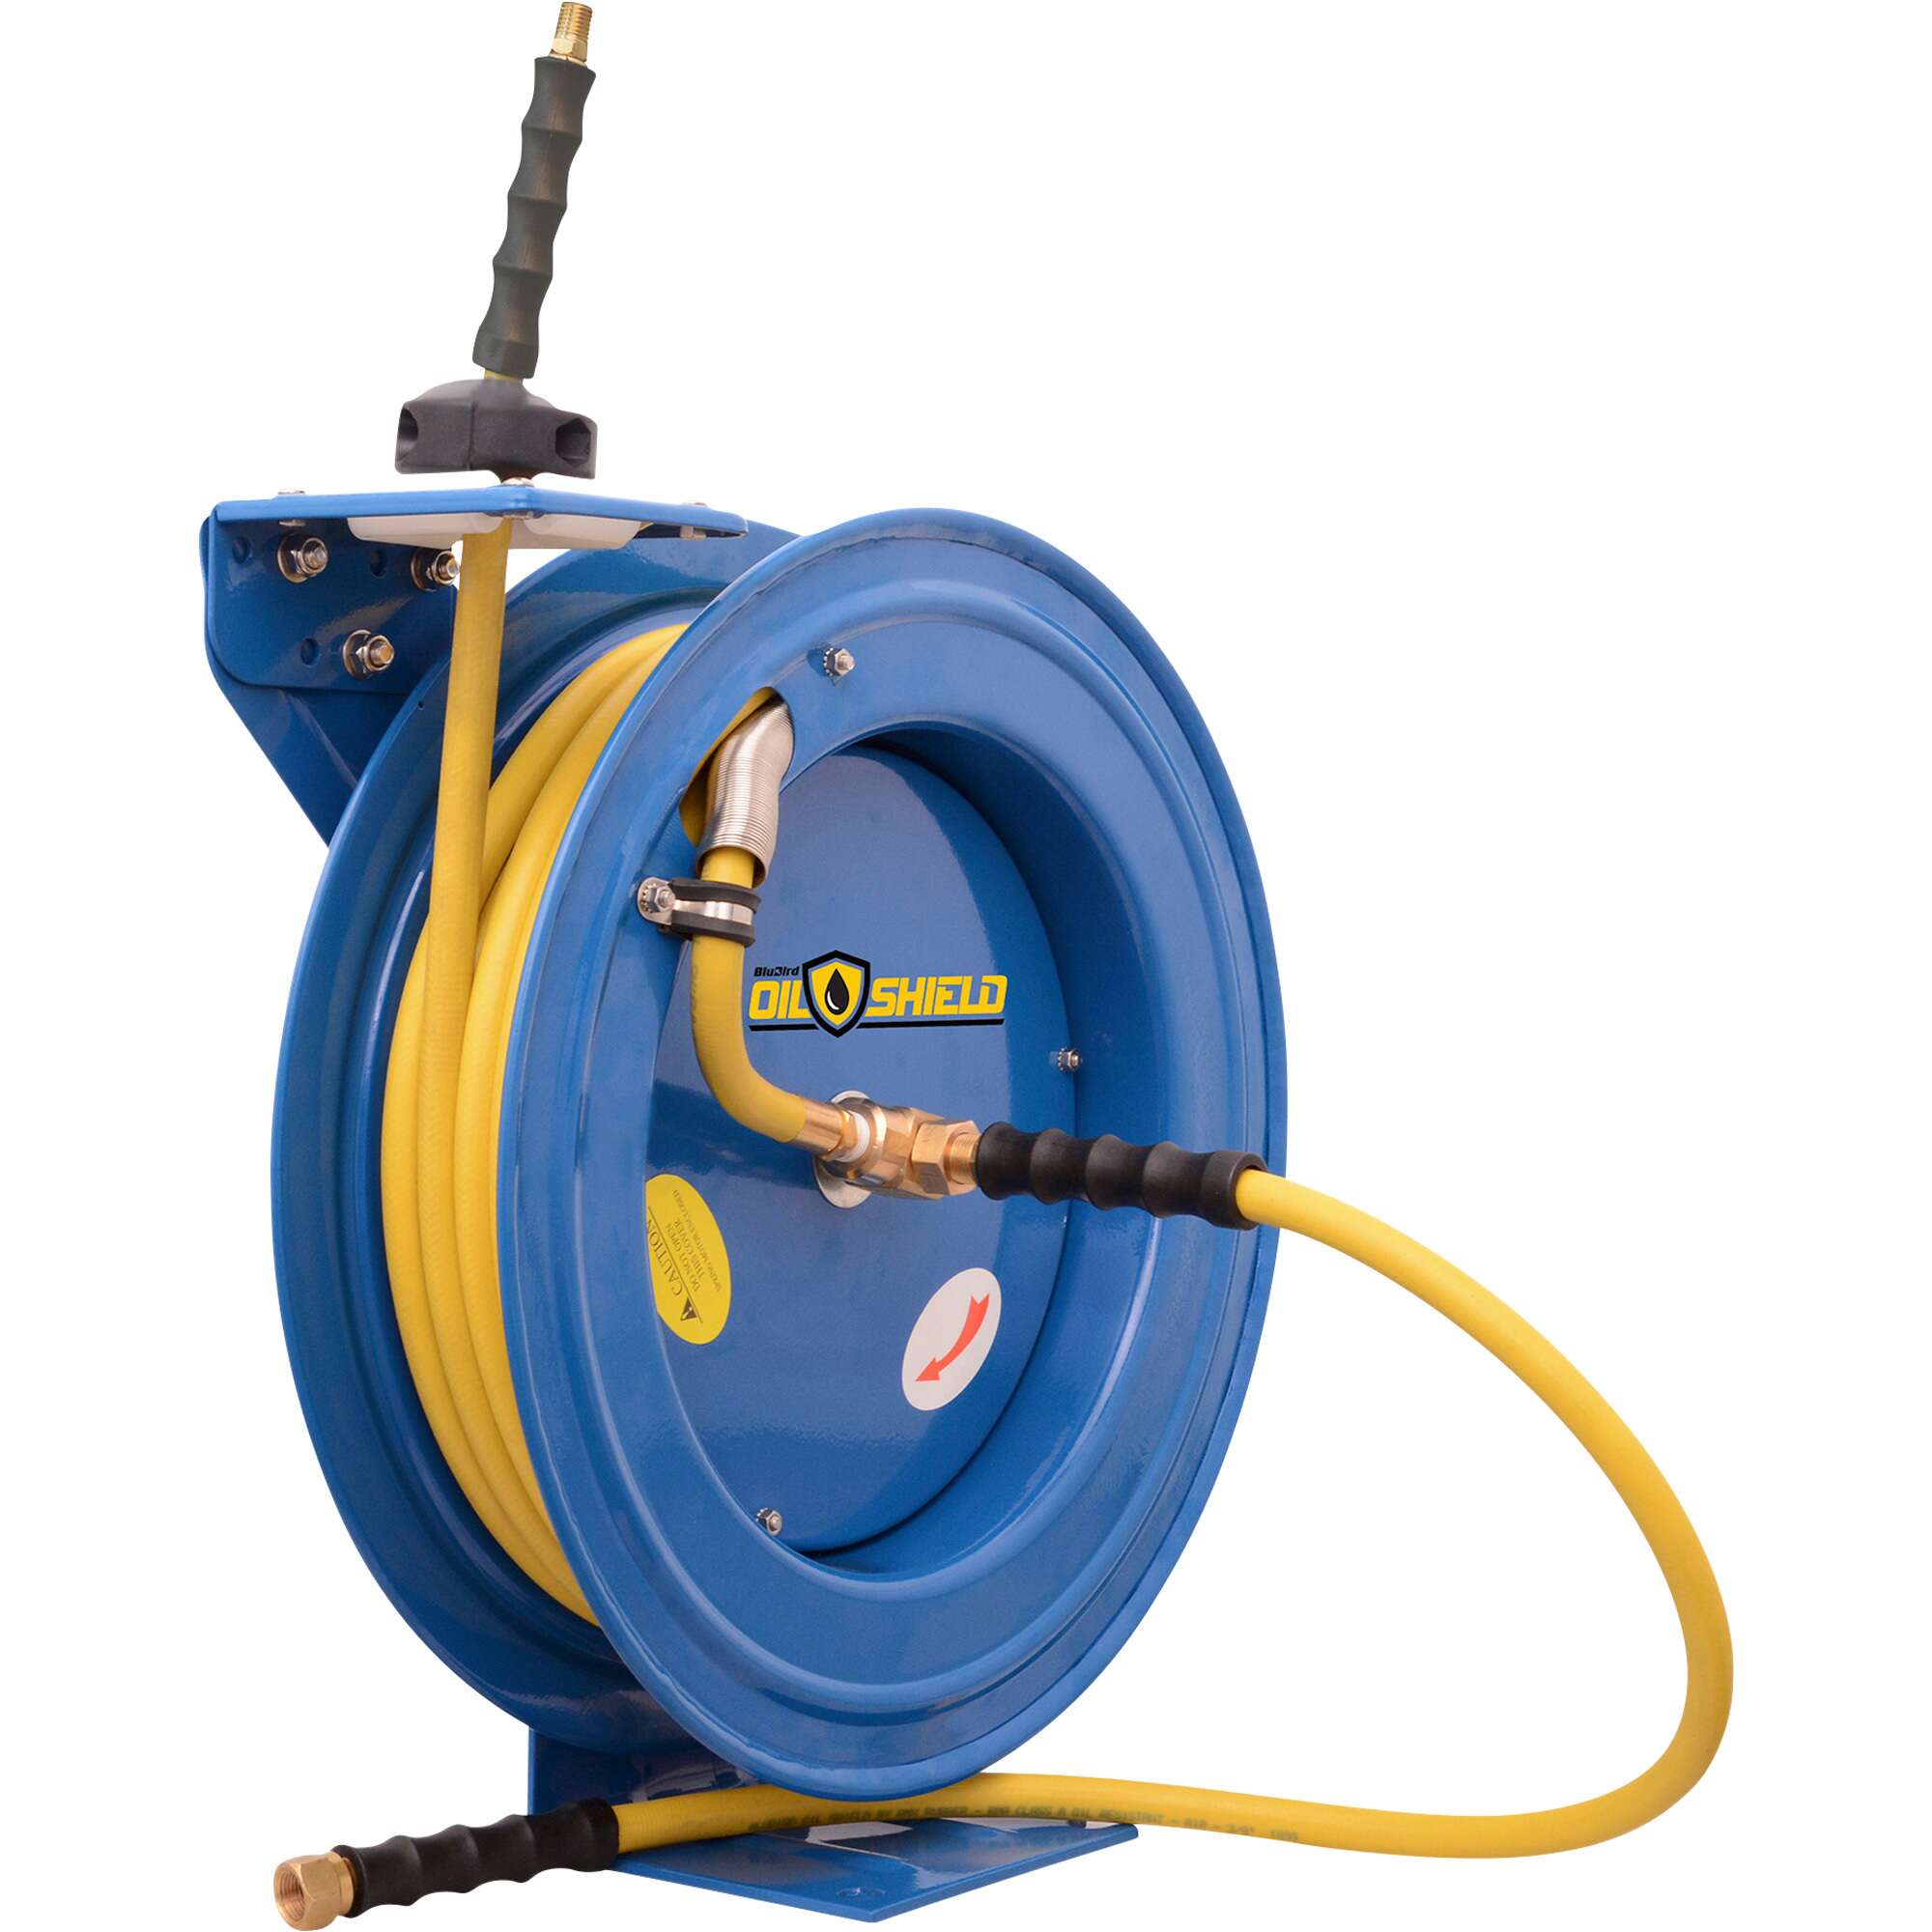 https://primadian.com/wp-content/uploads/2022/06/Oil-Shield-Retractable-Air-Hose-Reel-With-1-2000x2000.jpg